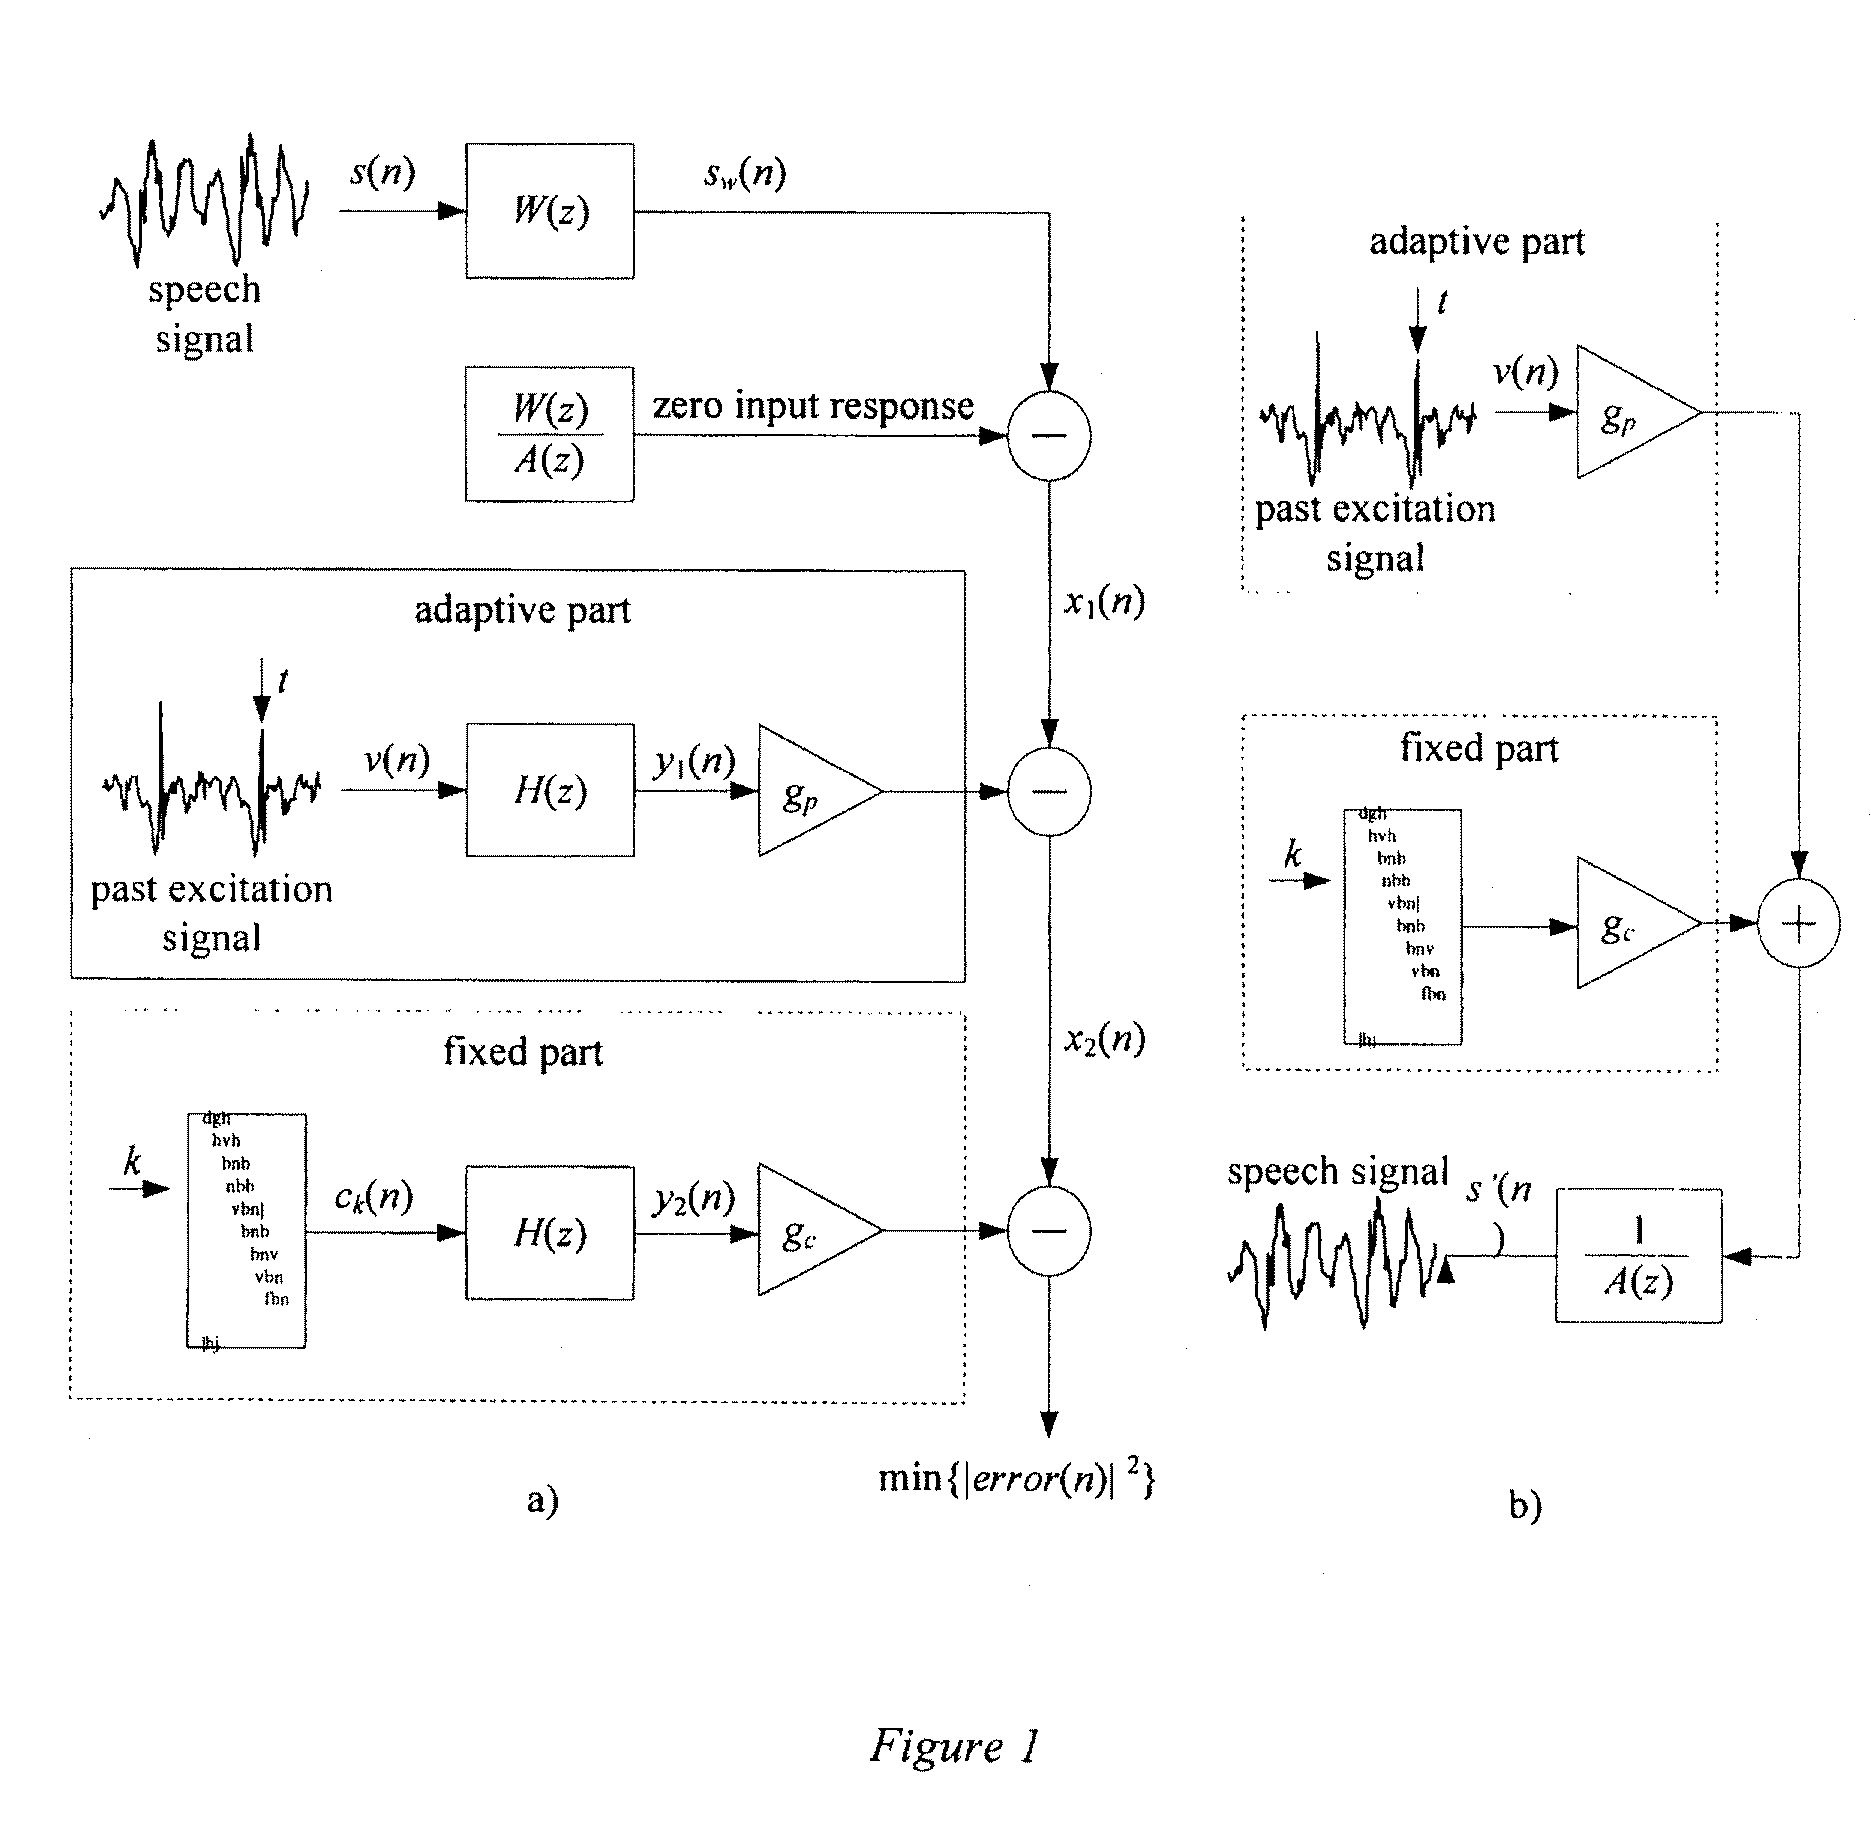 Method and Device for Coding Transition Frames in Speech Signals